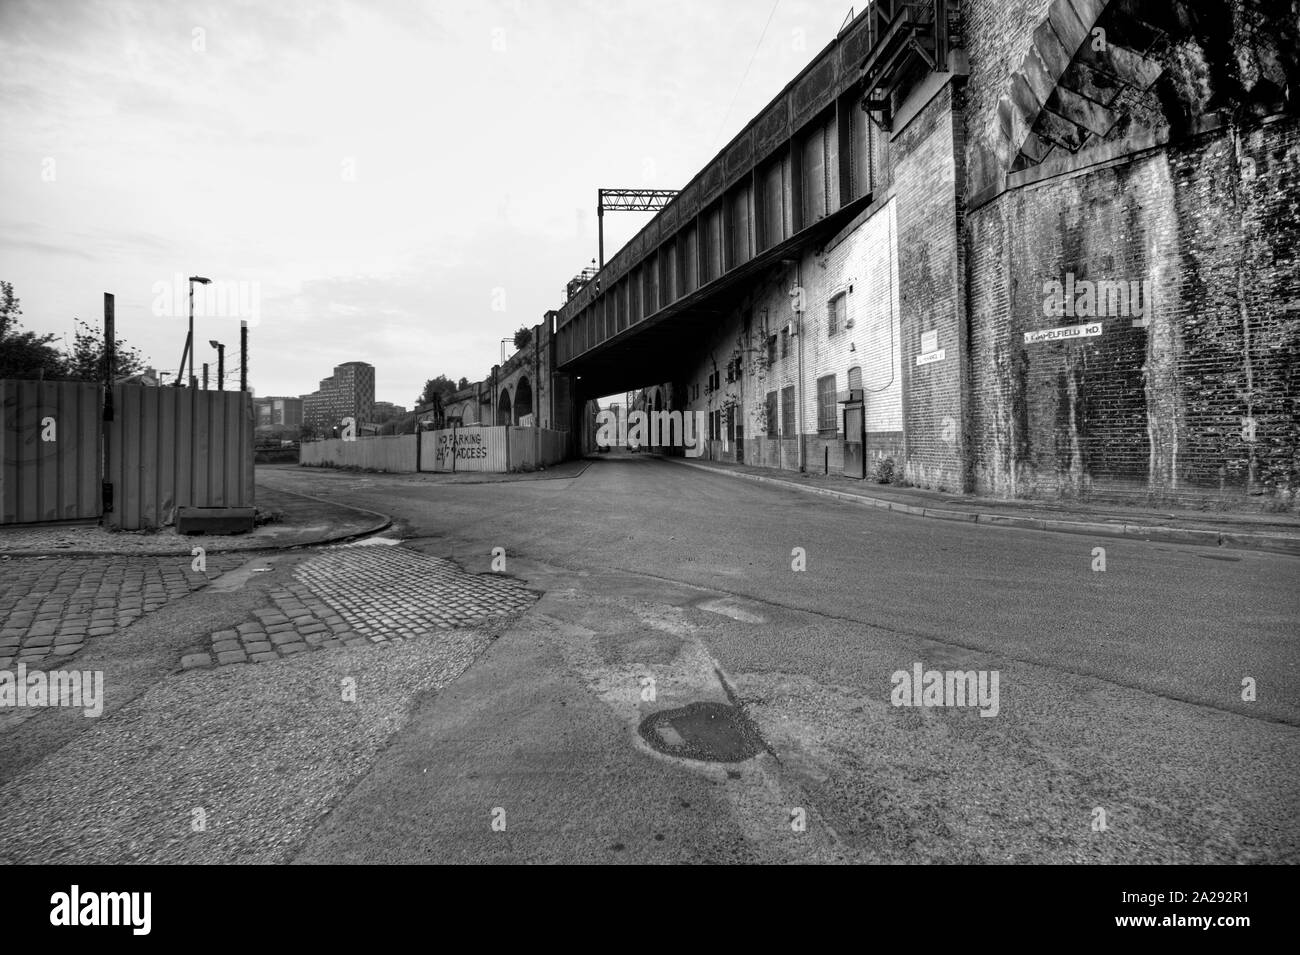 Chapelfield Road and Temperance Street, near Piccadilly railway arches, taken from River Street, Ardwick, Manchester, UK Stock Photo